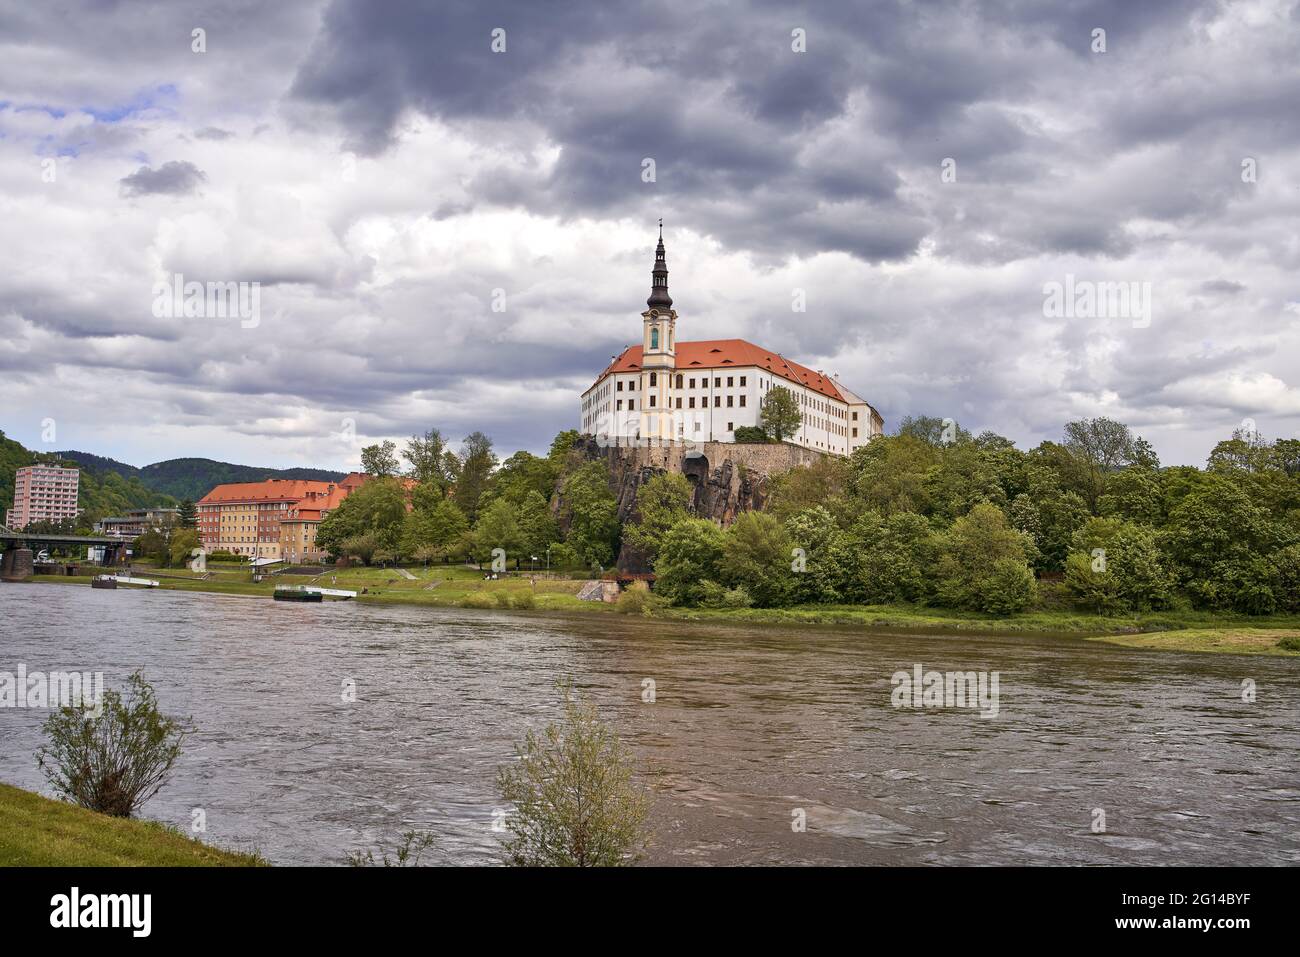 DECIN, CZECH REPUBLIC - MAY 22, 2021: Panorama of the town with the castle behind the Elbe river Stock Photo